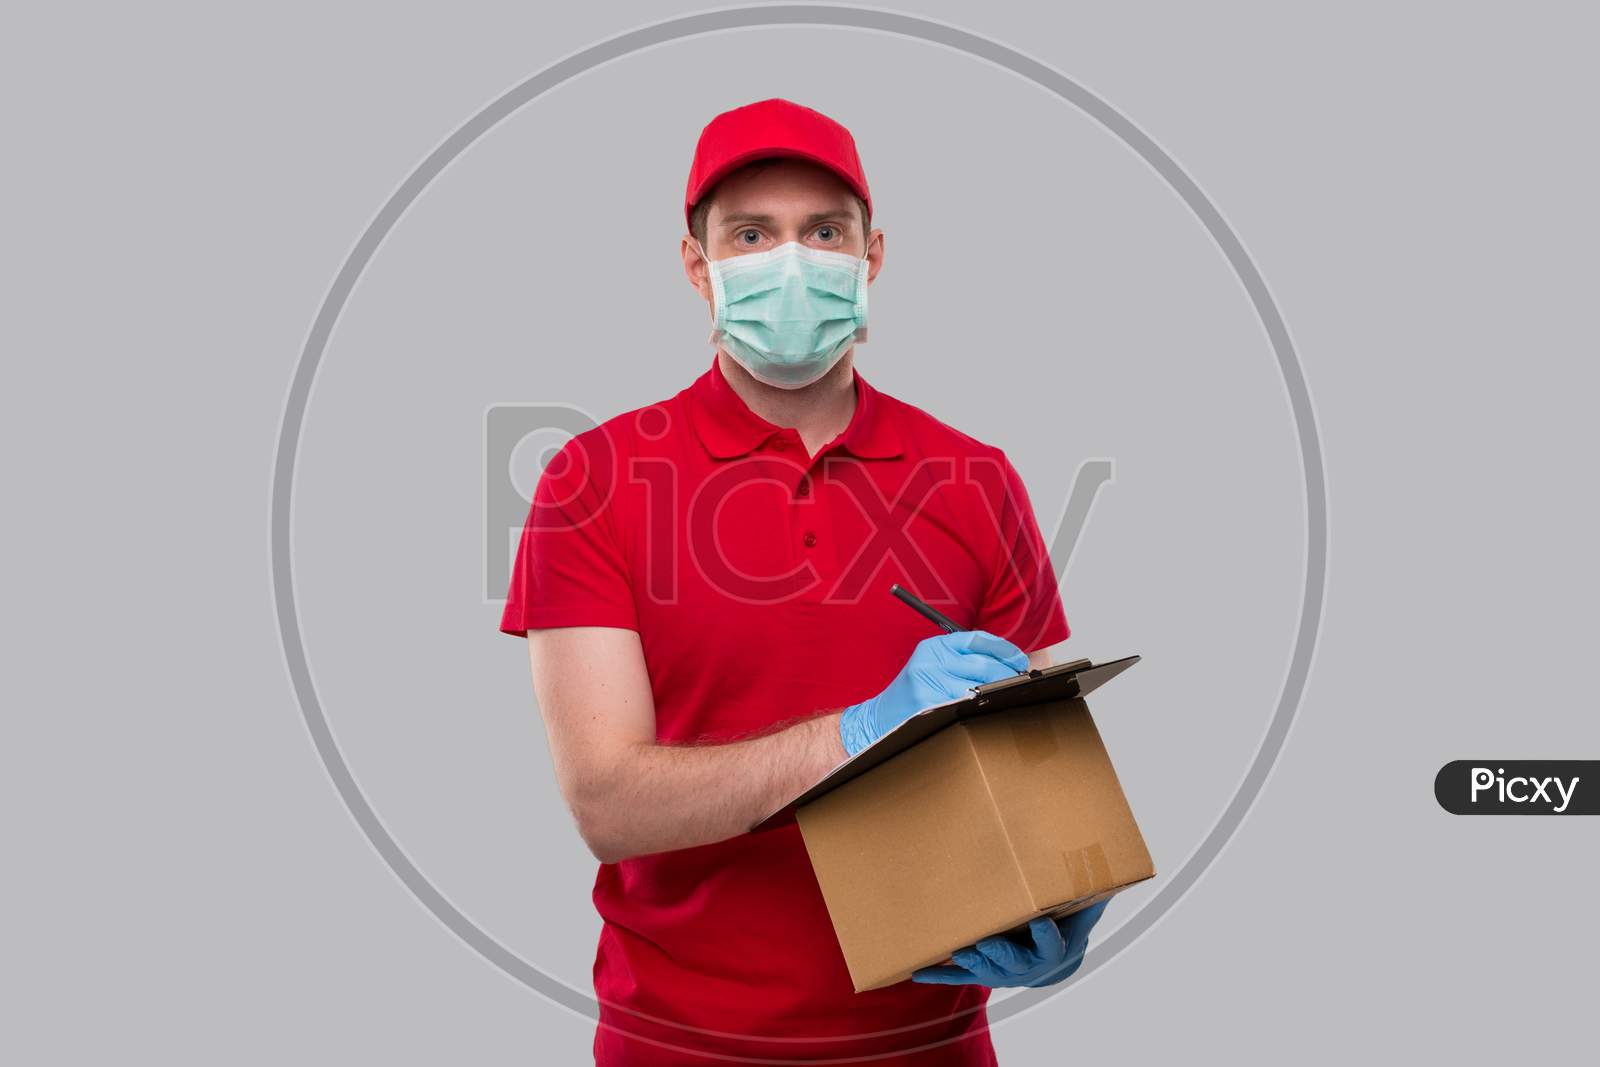 Delivery Man Wearing Medical Mask And Gloves Writing In Clipboard With Box In Hands Watching In Camera. Delivery Boy Home Delivery.